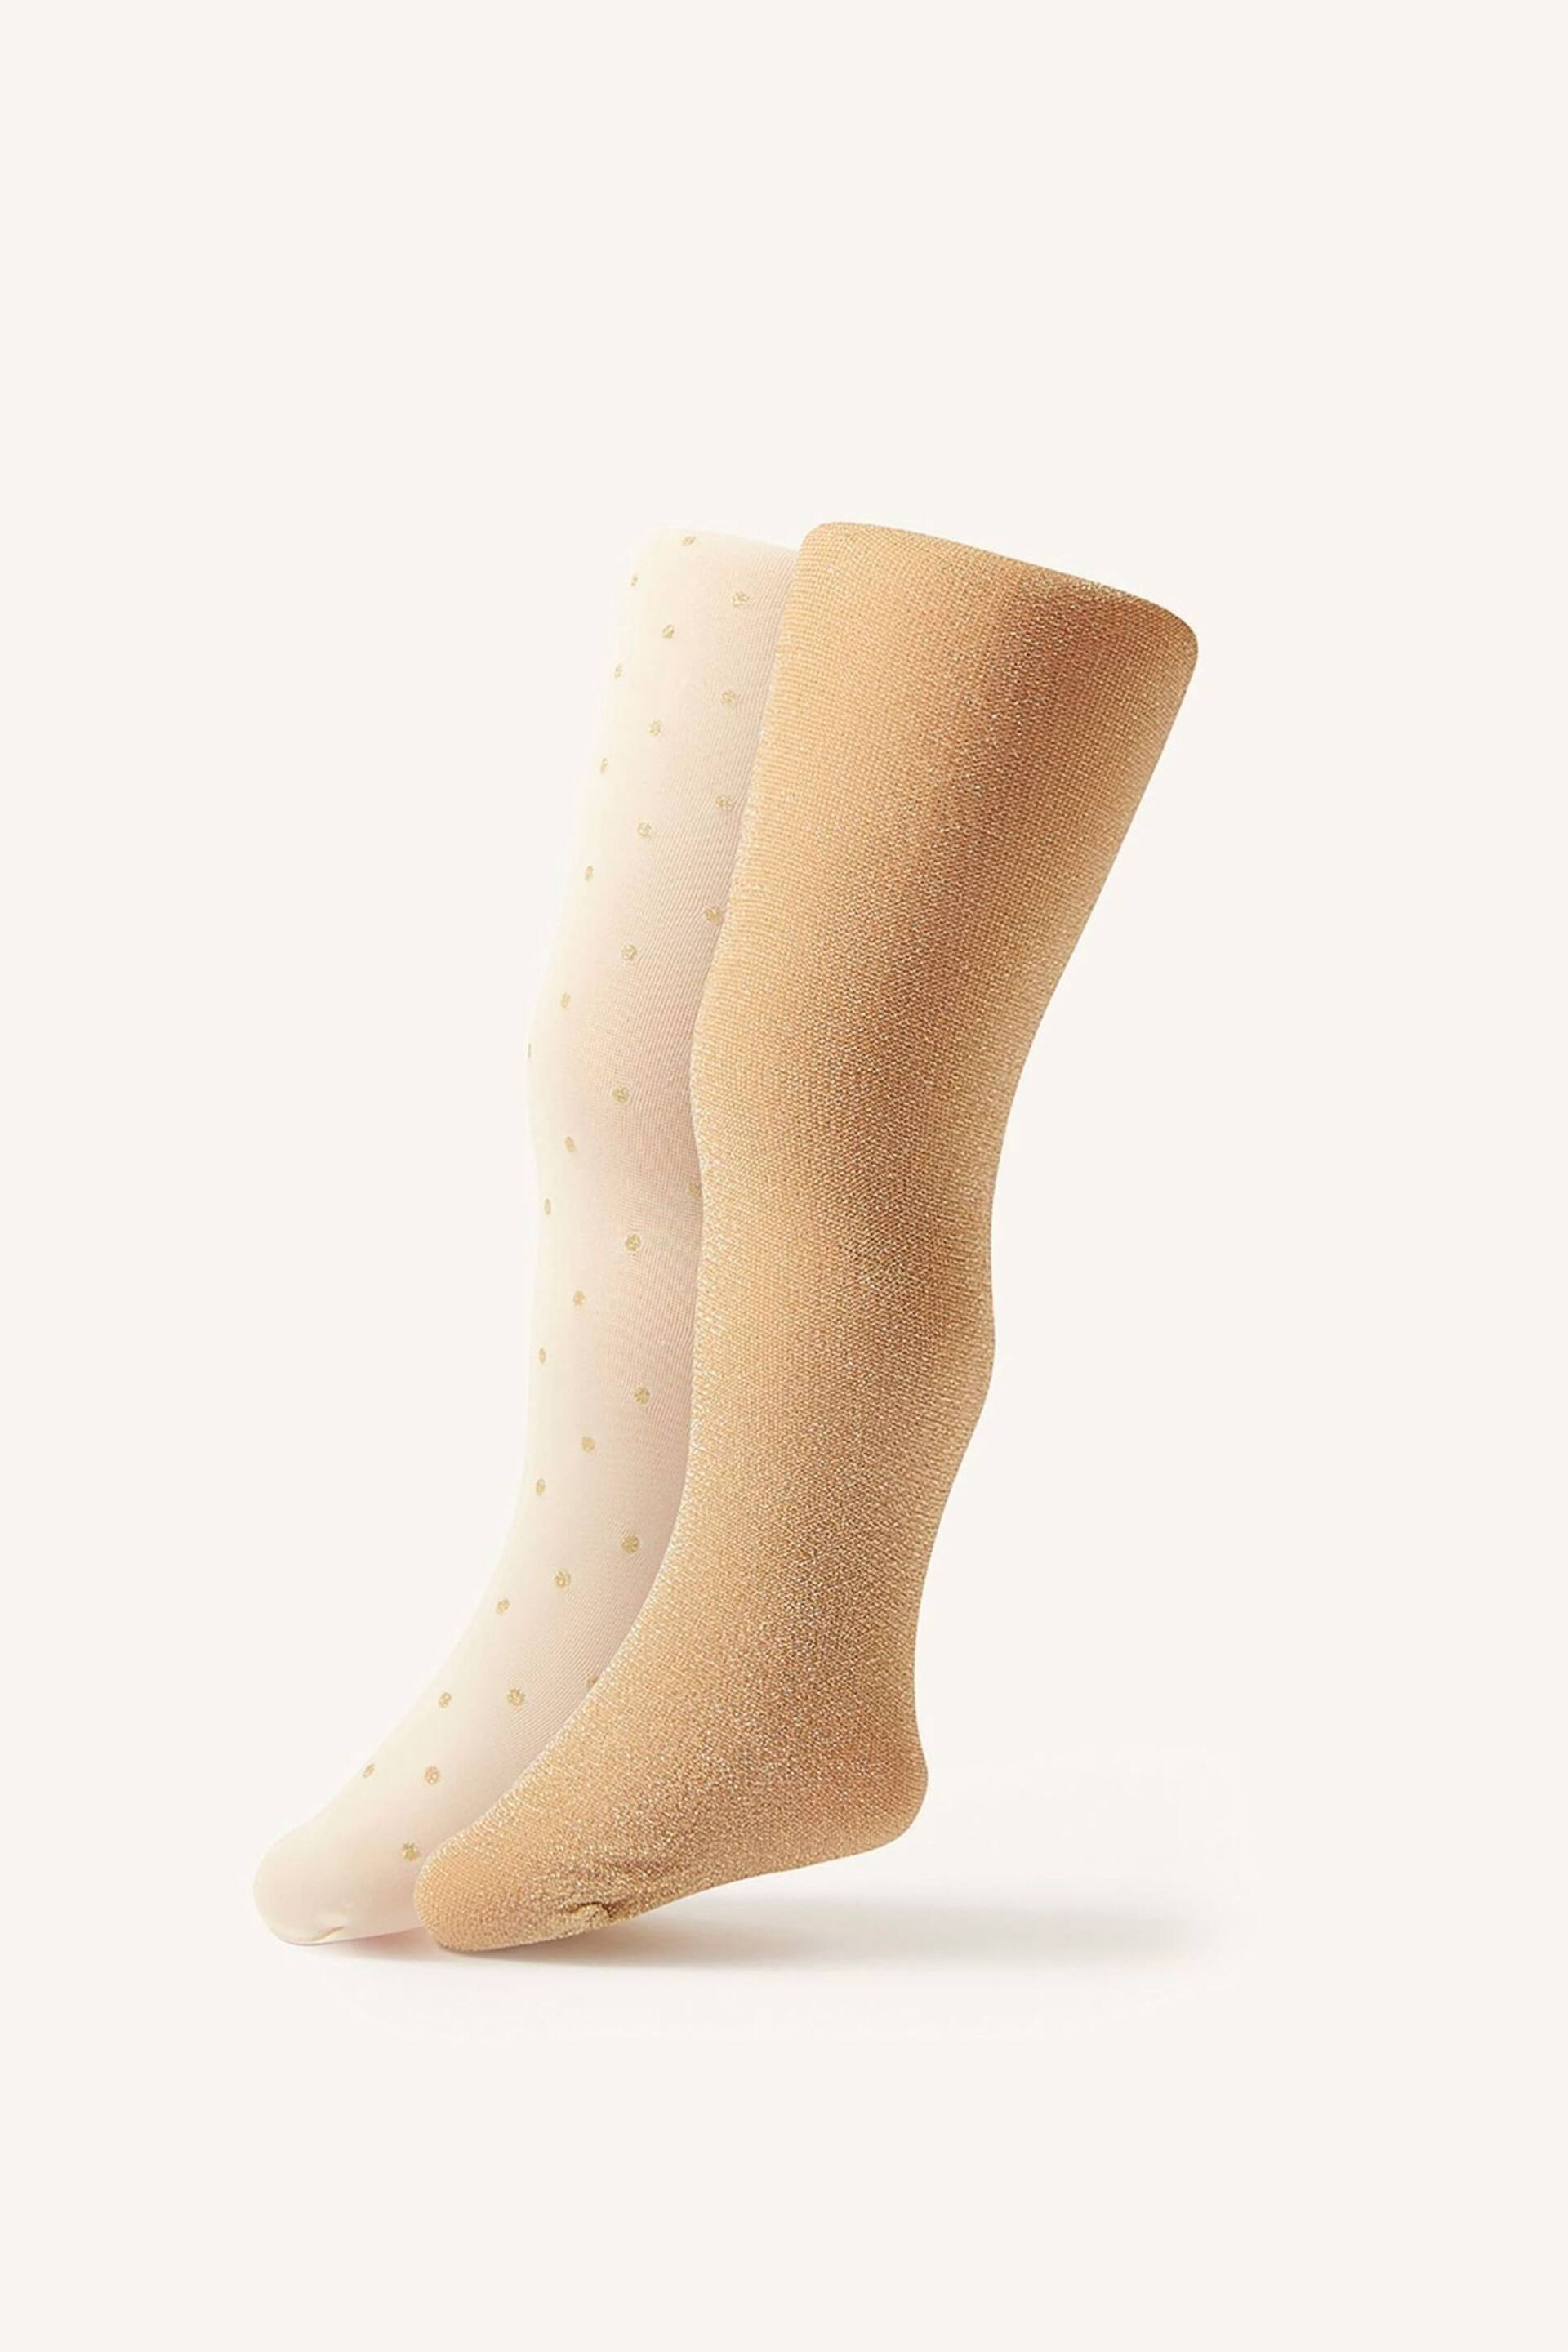 Monsoon Gold Baby Sparkle Tights 2 Pack - Image 1 of 3